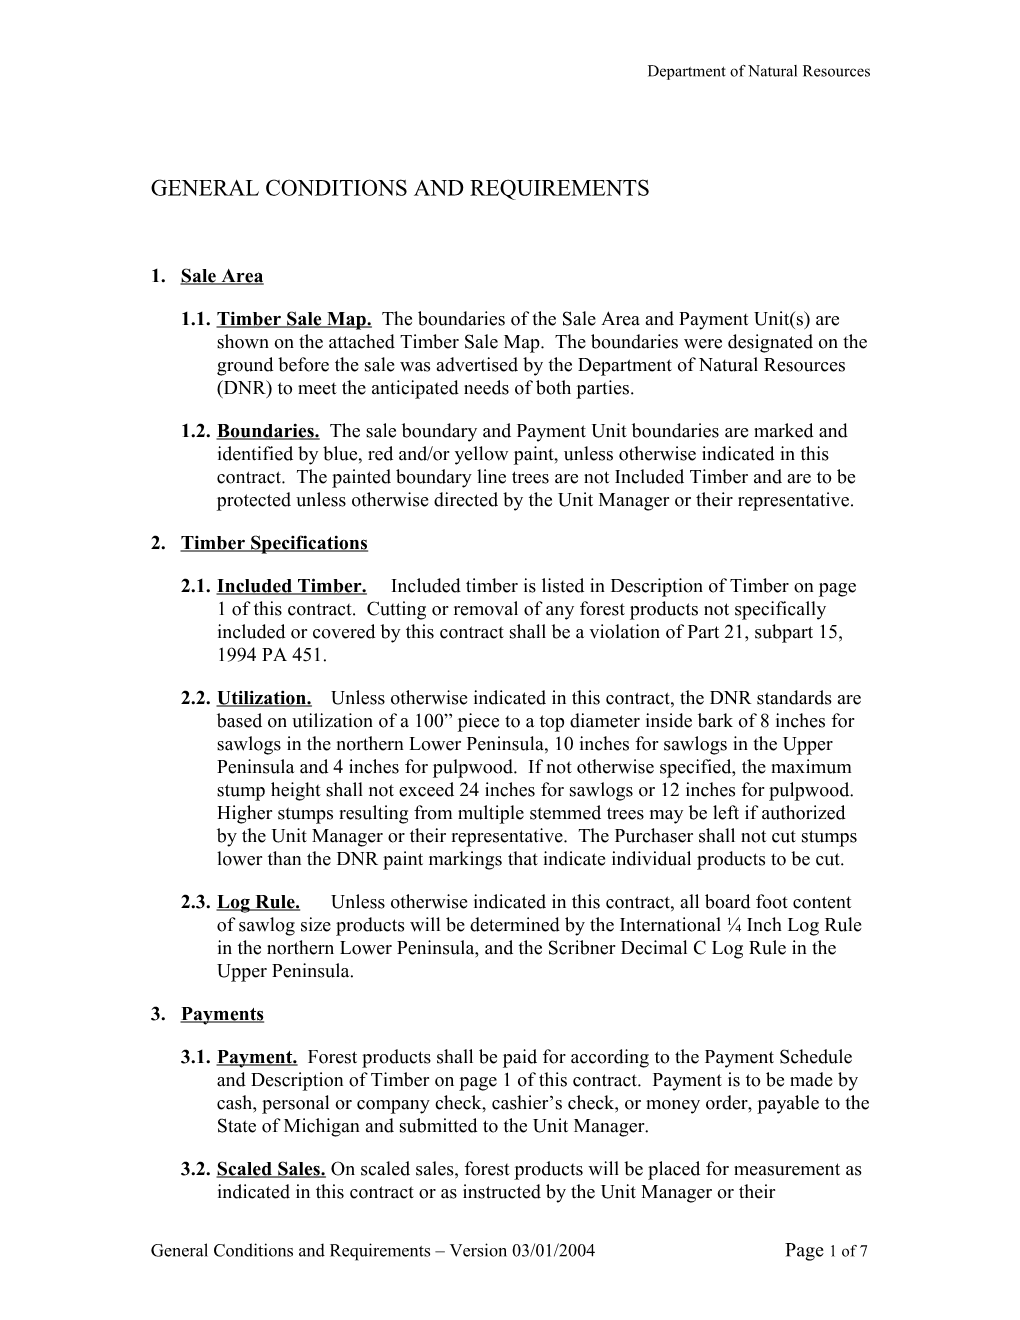 Conditions and Requirements